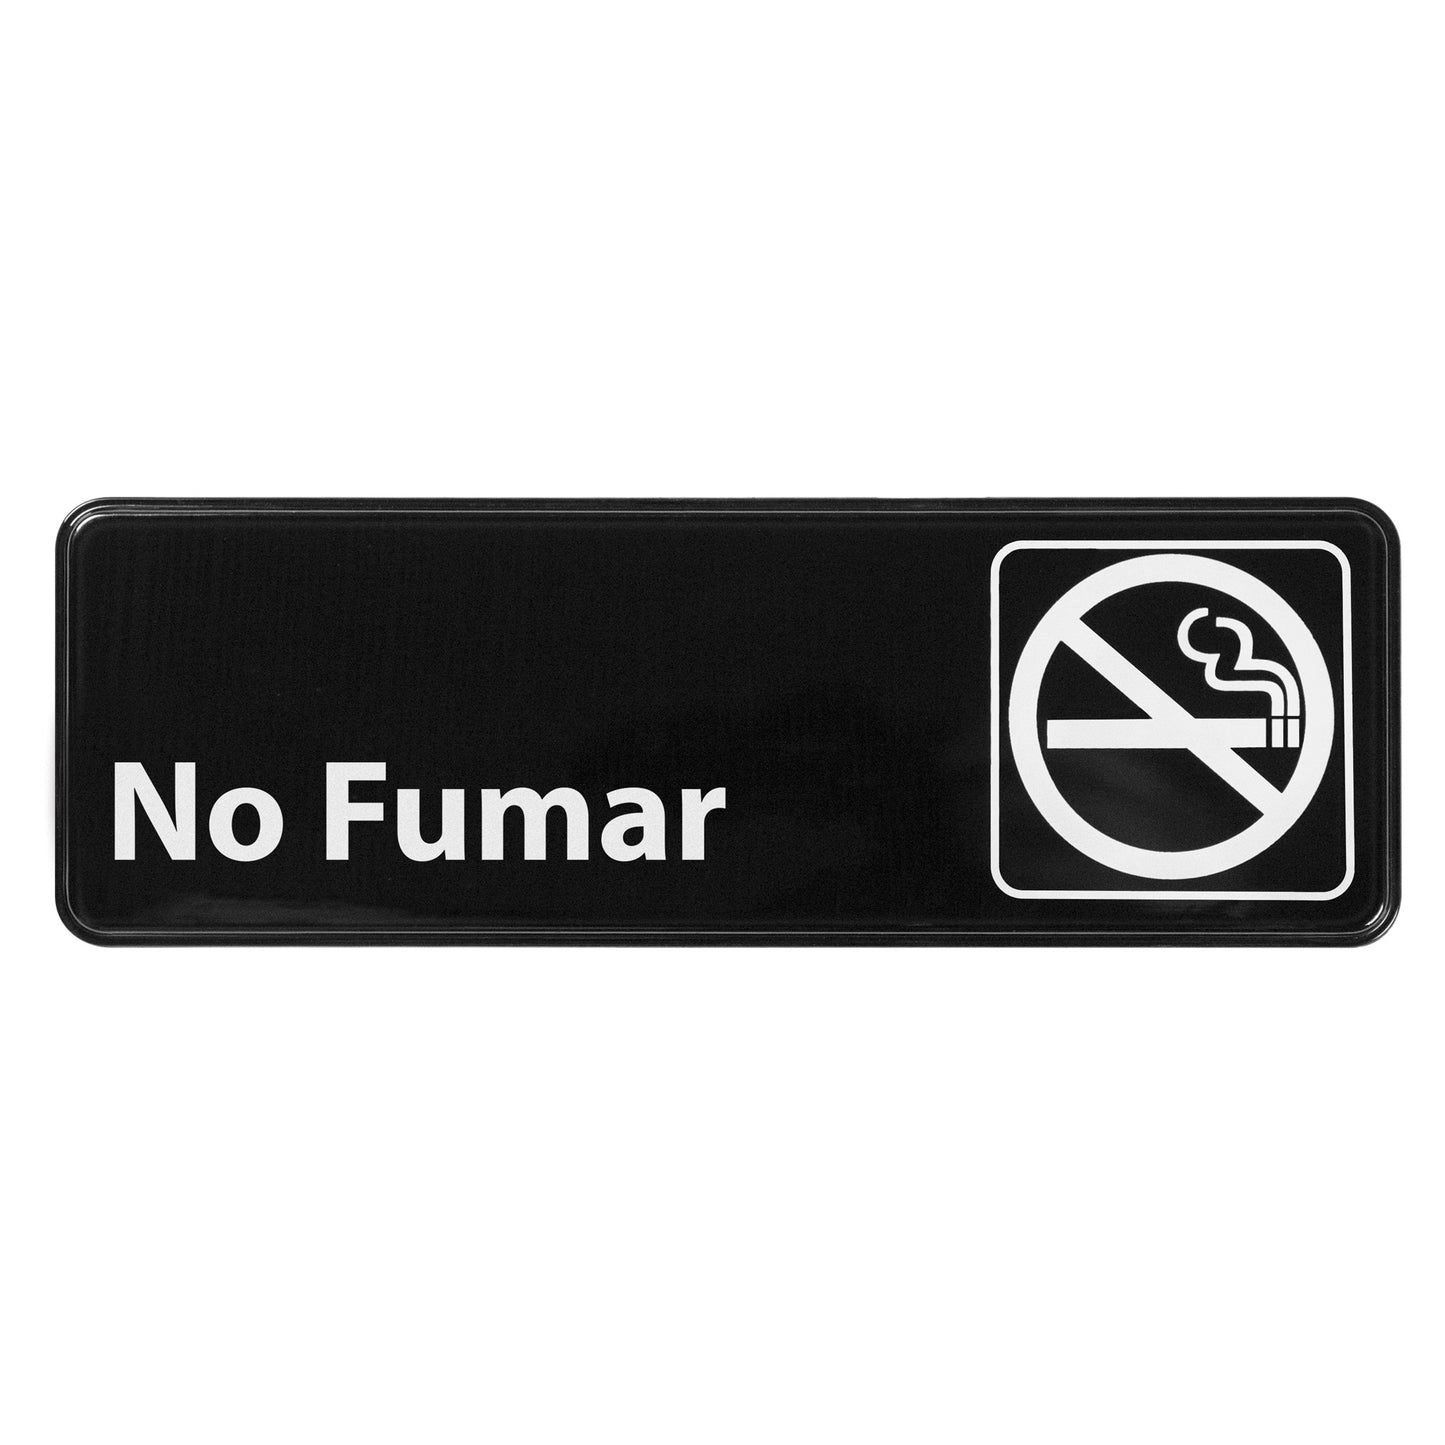 SGN-364 - Information Signs, 9"W x 3"H, Spanish - SGN-364 - No Smoking